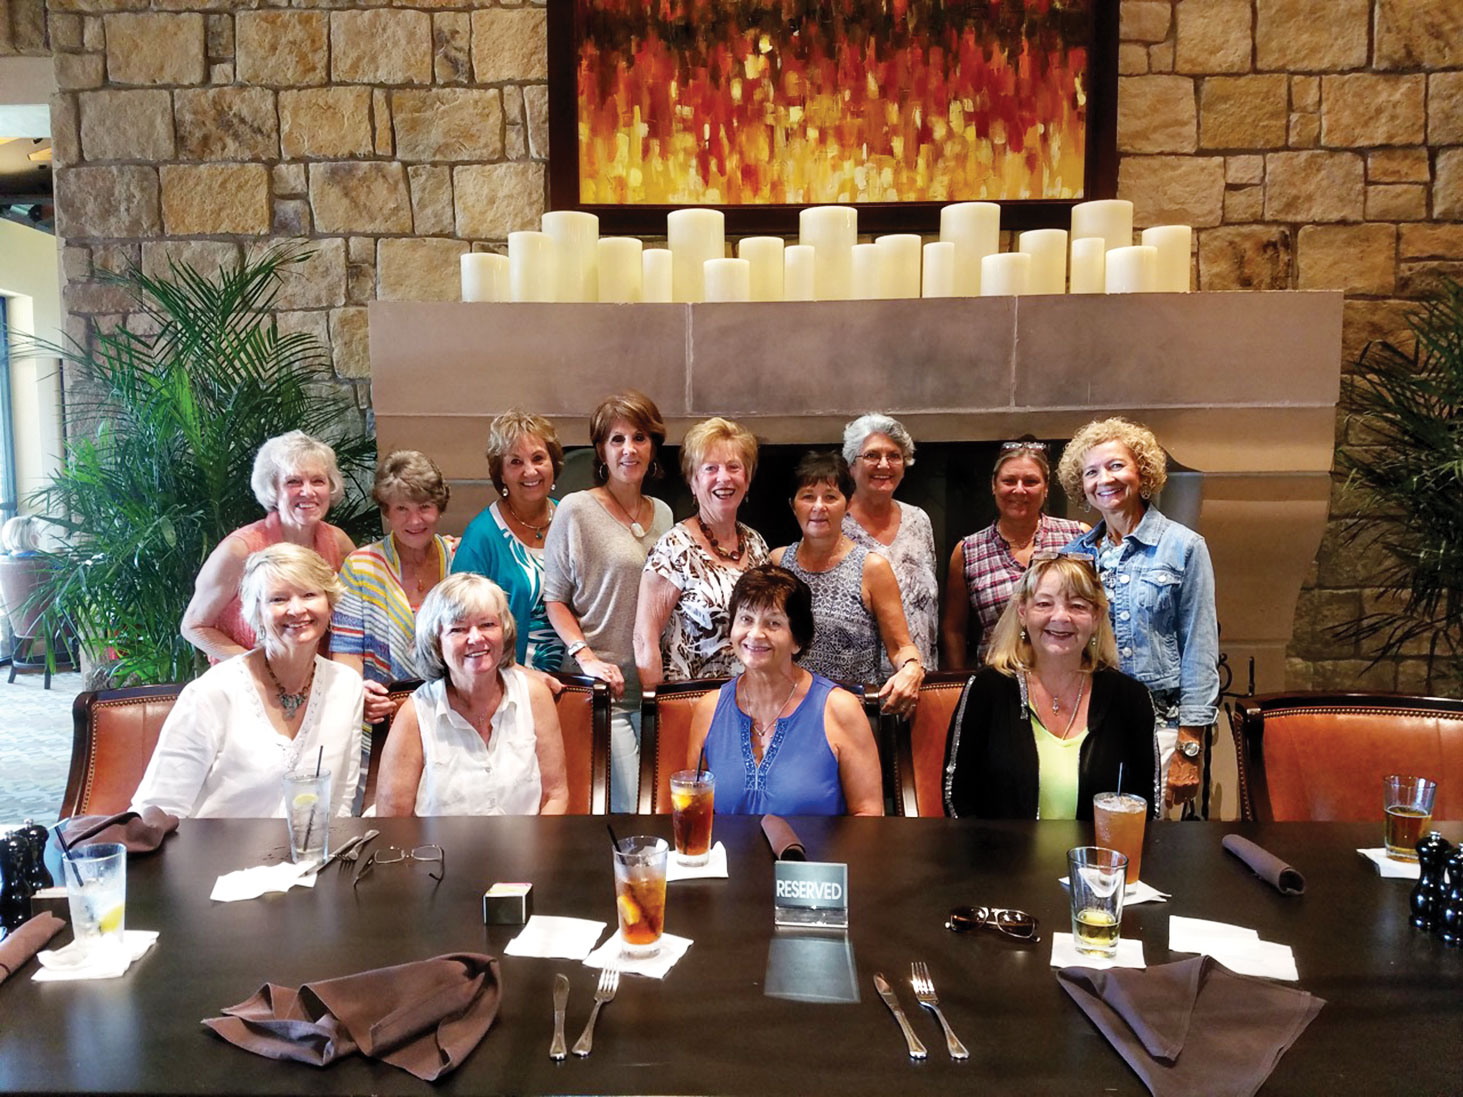 The RR Ladies 55+, 7.0 tennis team was named the winner of the 2016 Fort Worth City League. Left to right, front row: Sandy Thompson, Linda Grandfield, Renee Kowalski, Sandy Owens; second row: Joyce Kain, Nancy Bishoff, Sue Ehinger, Sandy DeVincenzo, Catherine Bass, Marti Harnly, Elaine Barrett, Patrice Forsyth and Paula Hemingway